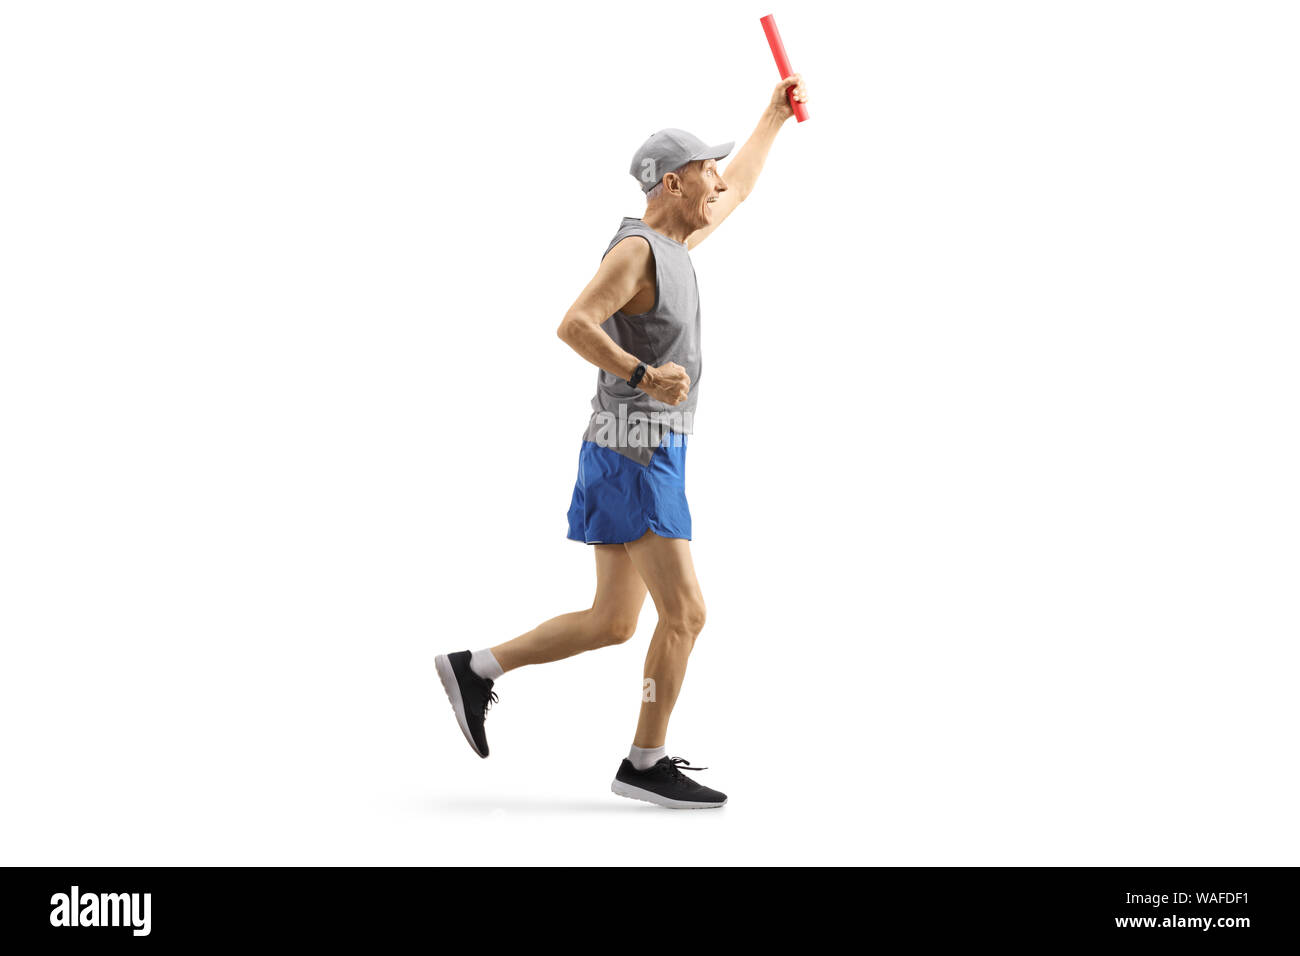 Full length profile shot of a mature man running a relay race with a baton in his hand isolated on white background Stock Photo